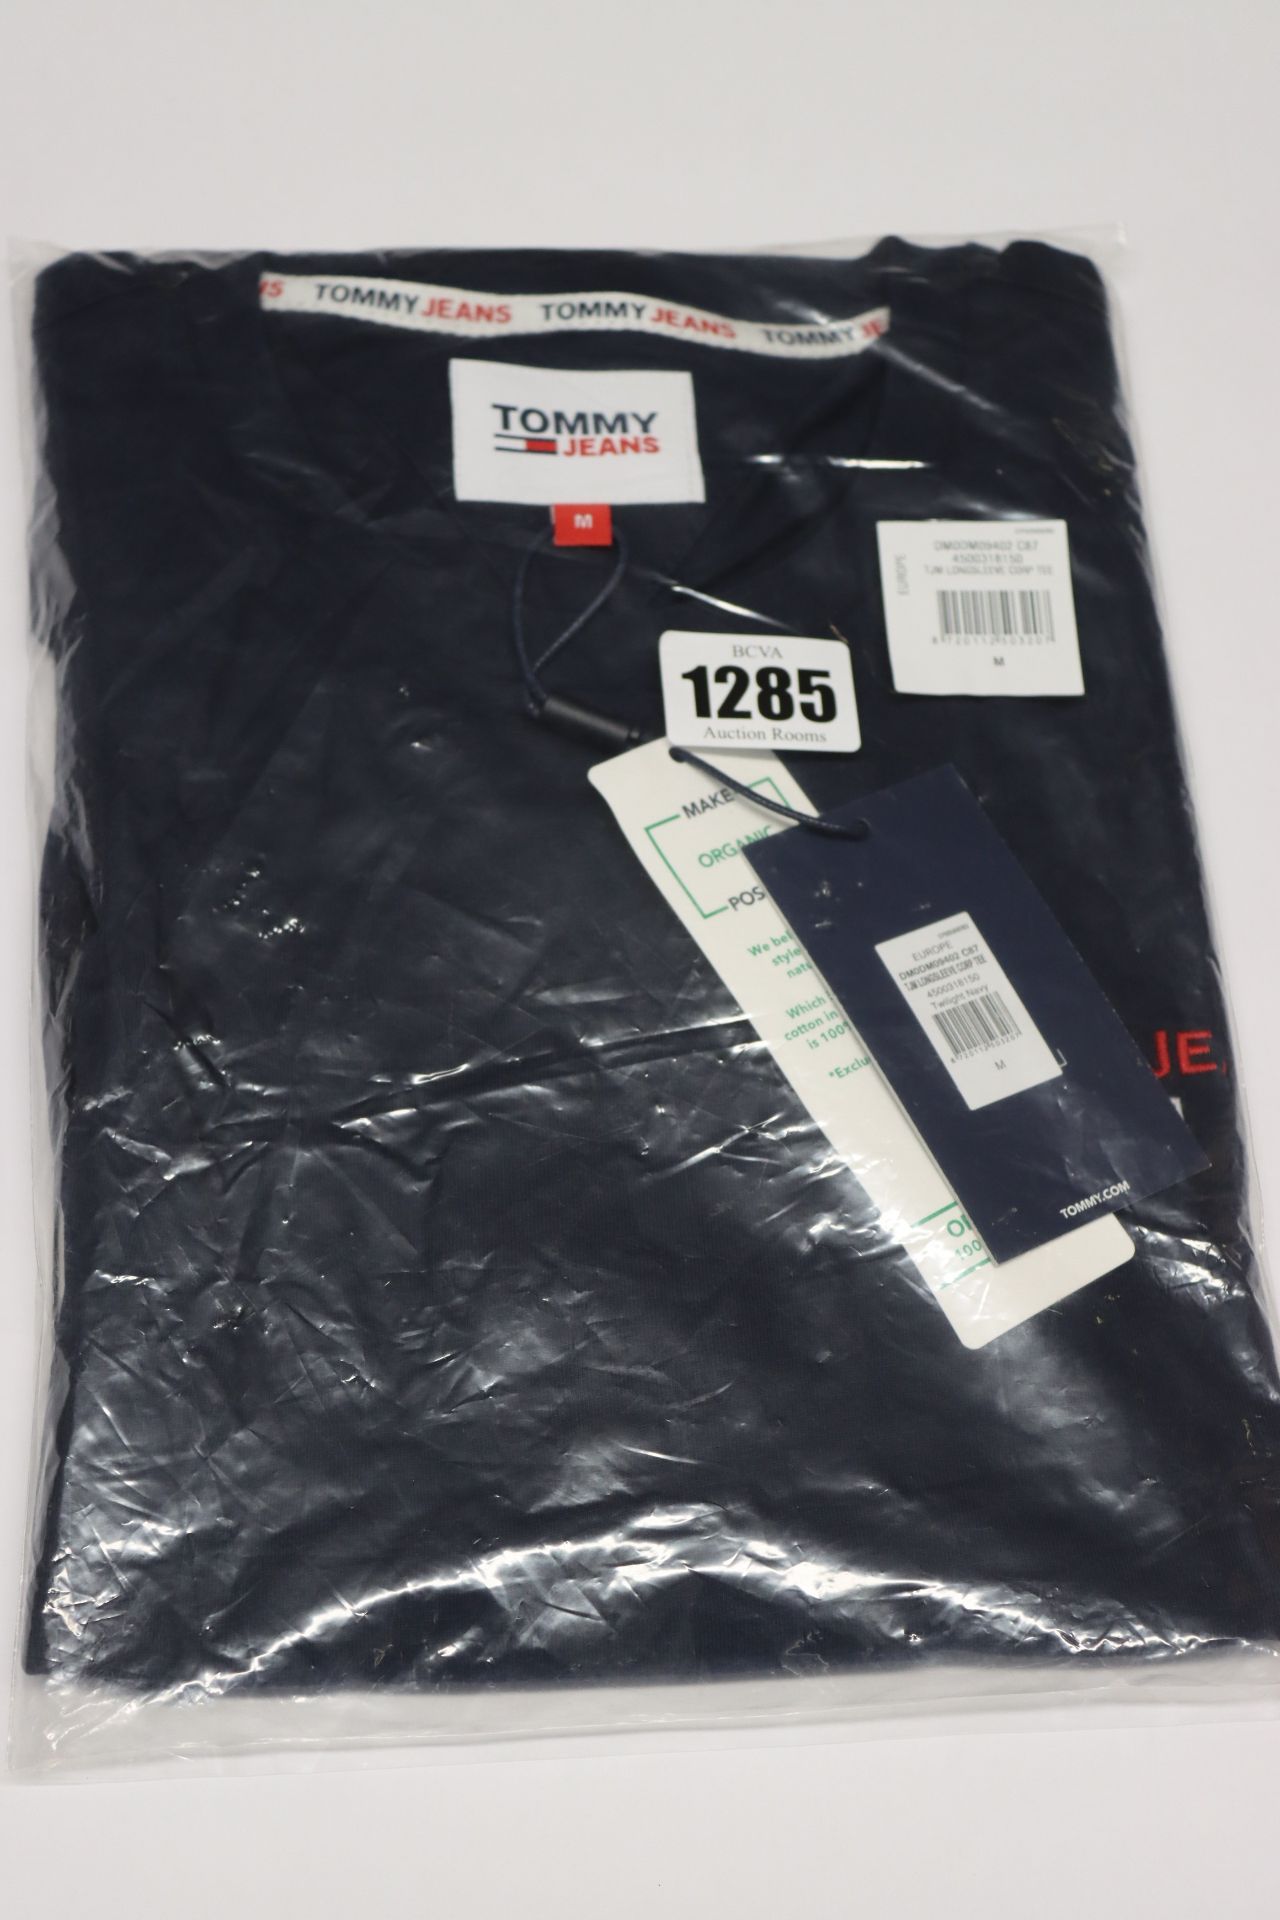 Ten as new Tommy Jeans TJM Long sleeve Corp T-shirts (3 x XS, 5 x S, 2 x M).